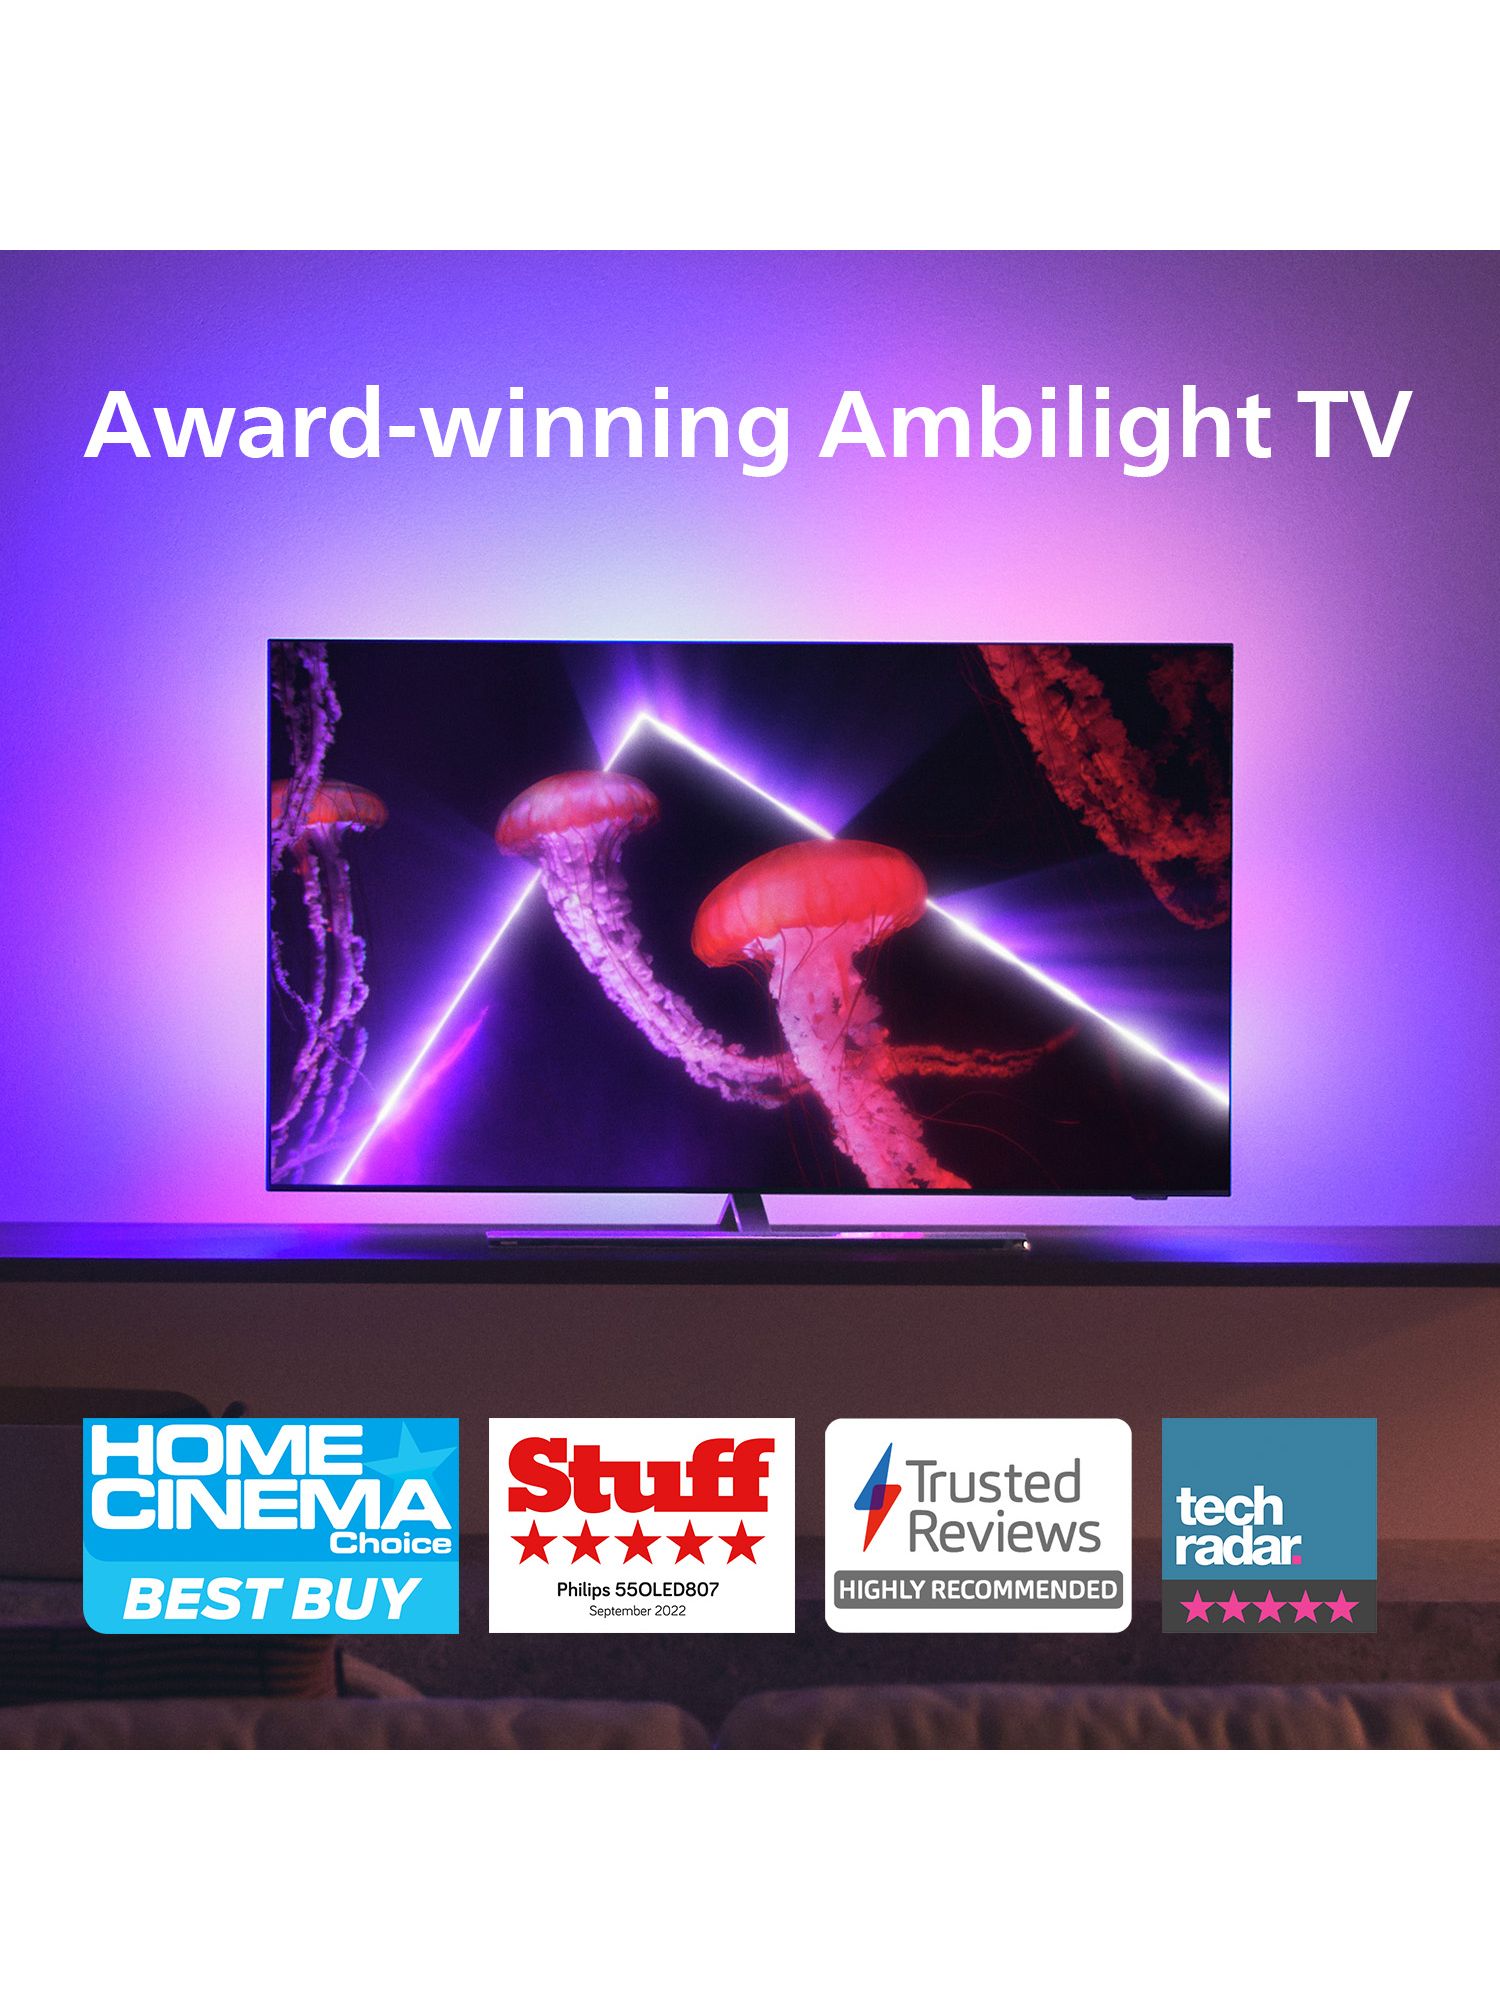 Stuff Gadget Awards 2013: Philips Hue + Ambilight is our Home